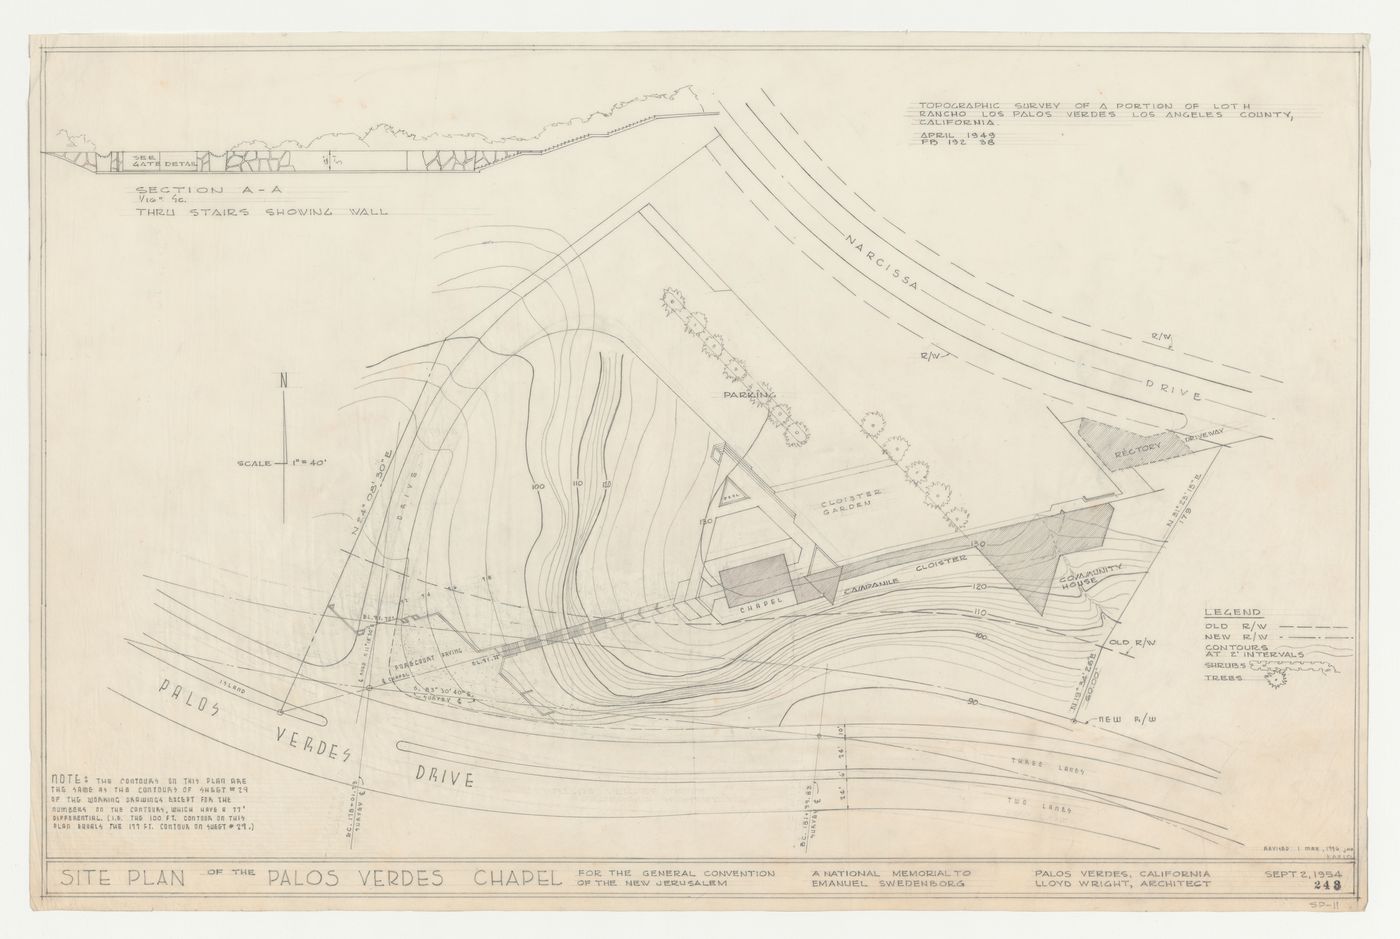 Wayfarers' Chapel, Palos Verdes, California: Site plan based on a topographic survey, with section through entrance steps showing gateway